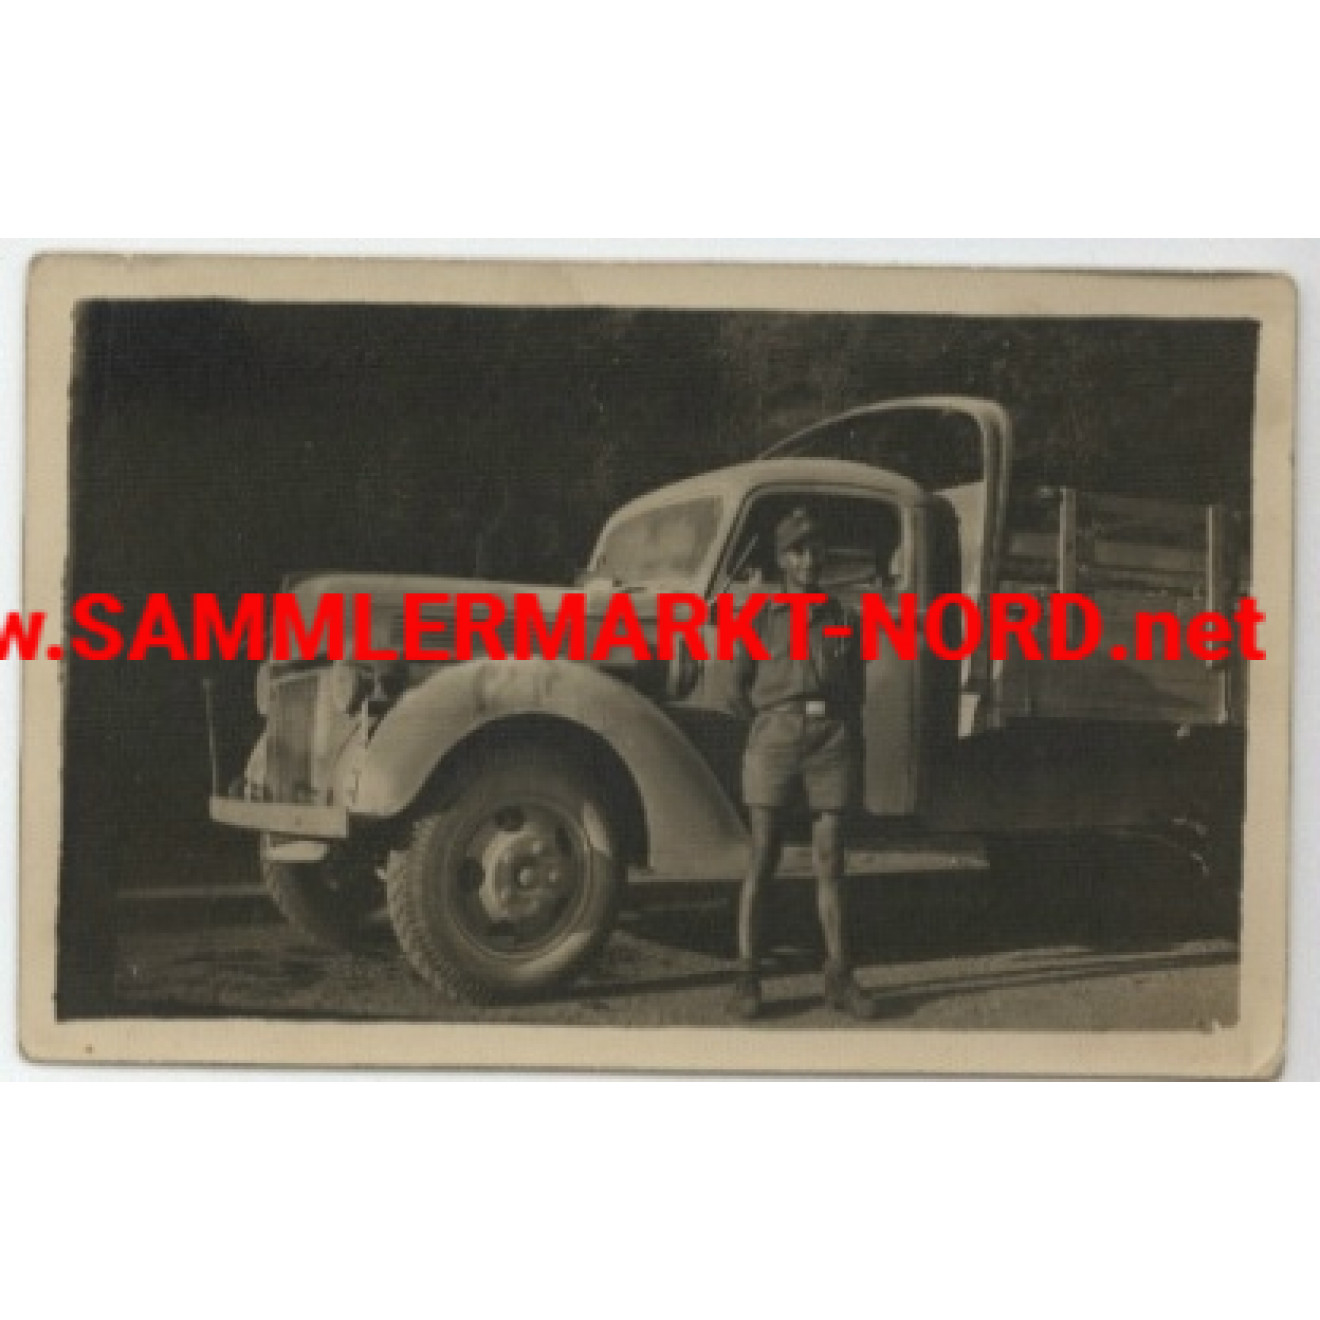 Soldier in tropical uniform in front of heavy truck